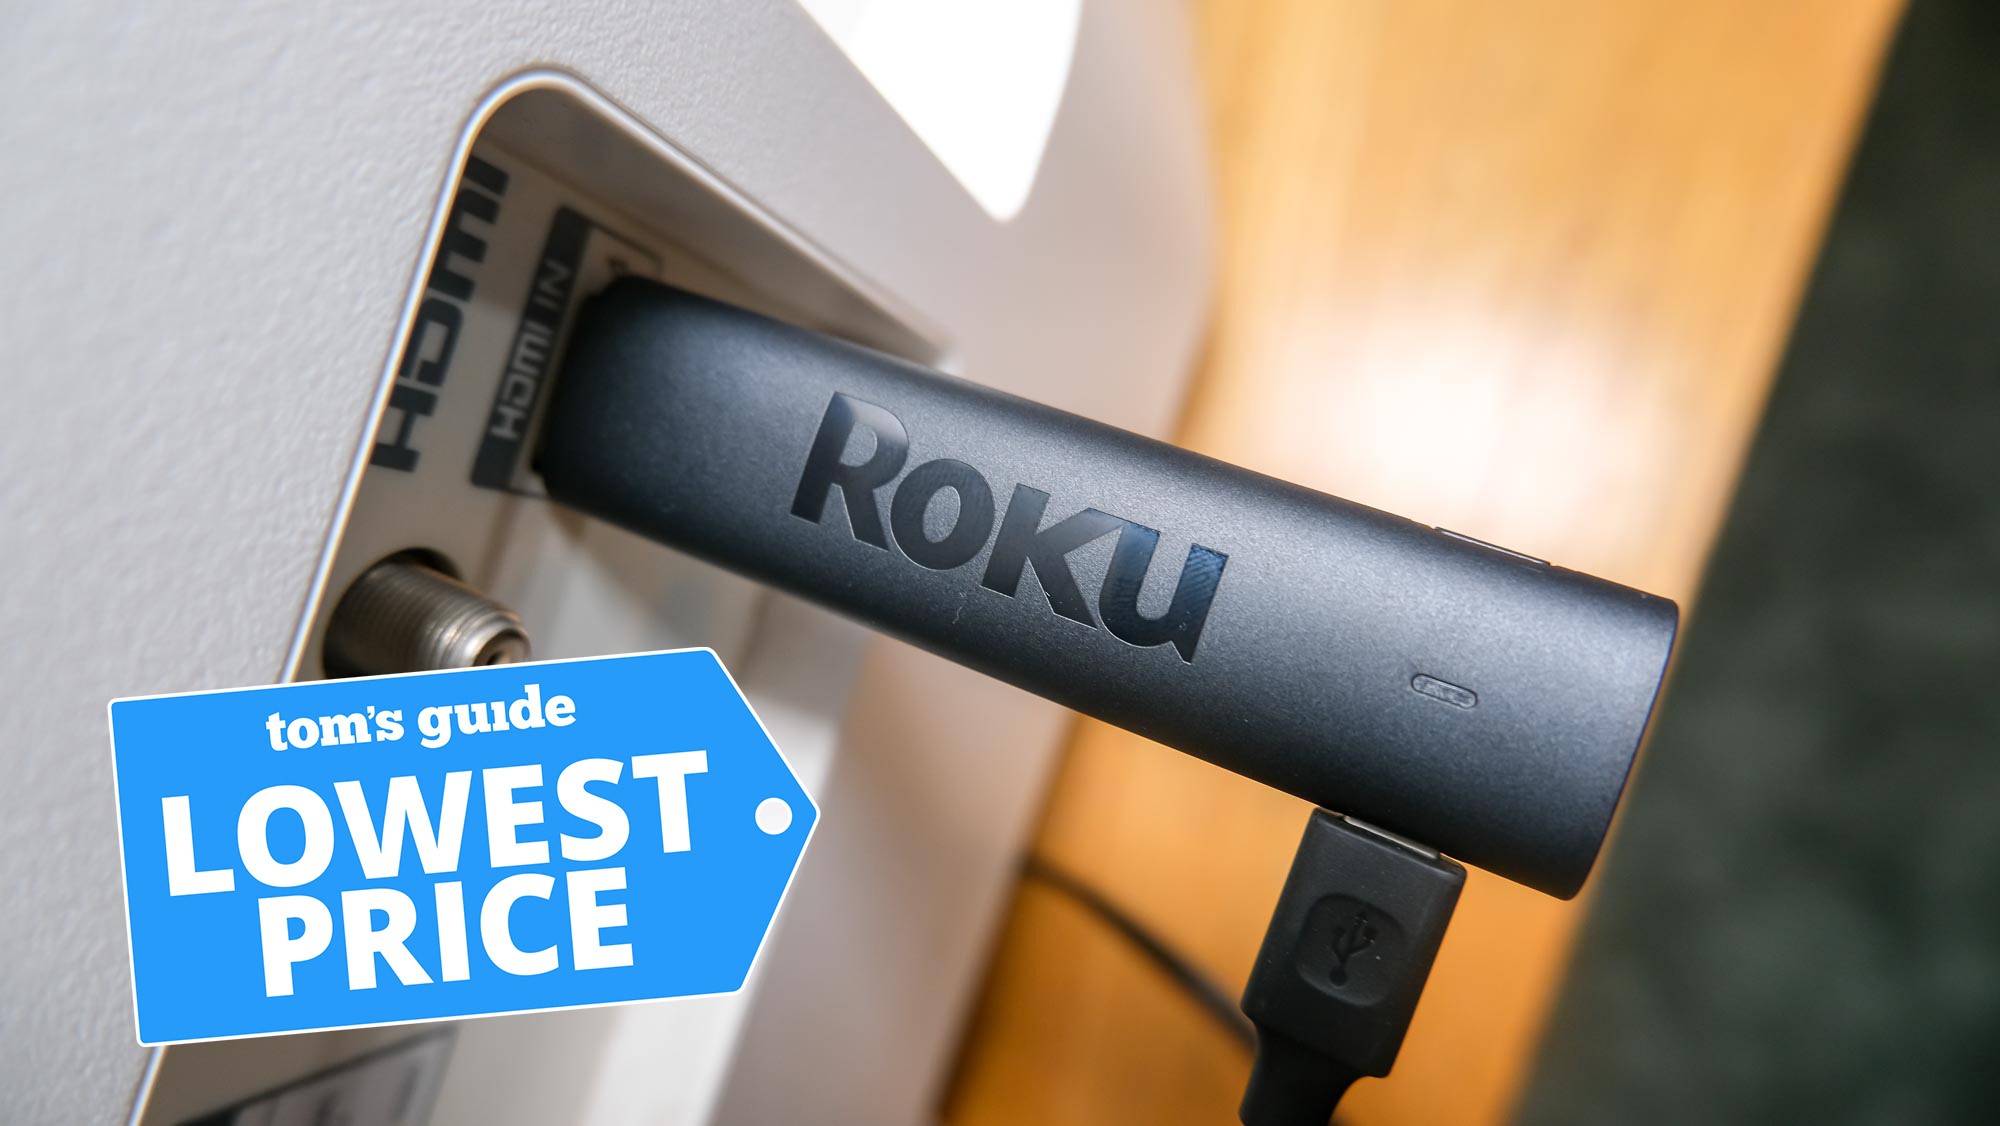 The Roku Streaming Stick 4K plugged into an HDMI port with a Tom's Guide Lowest Price chart on top